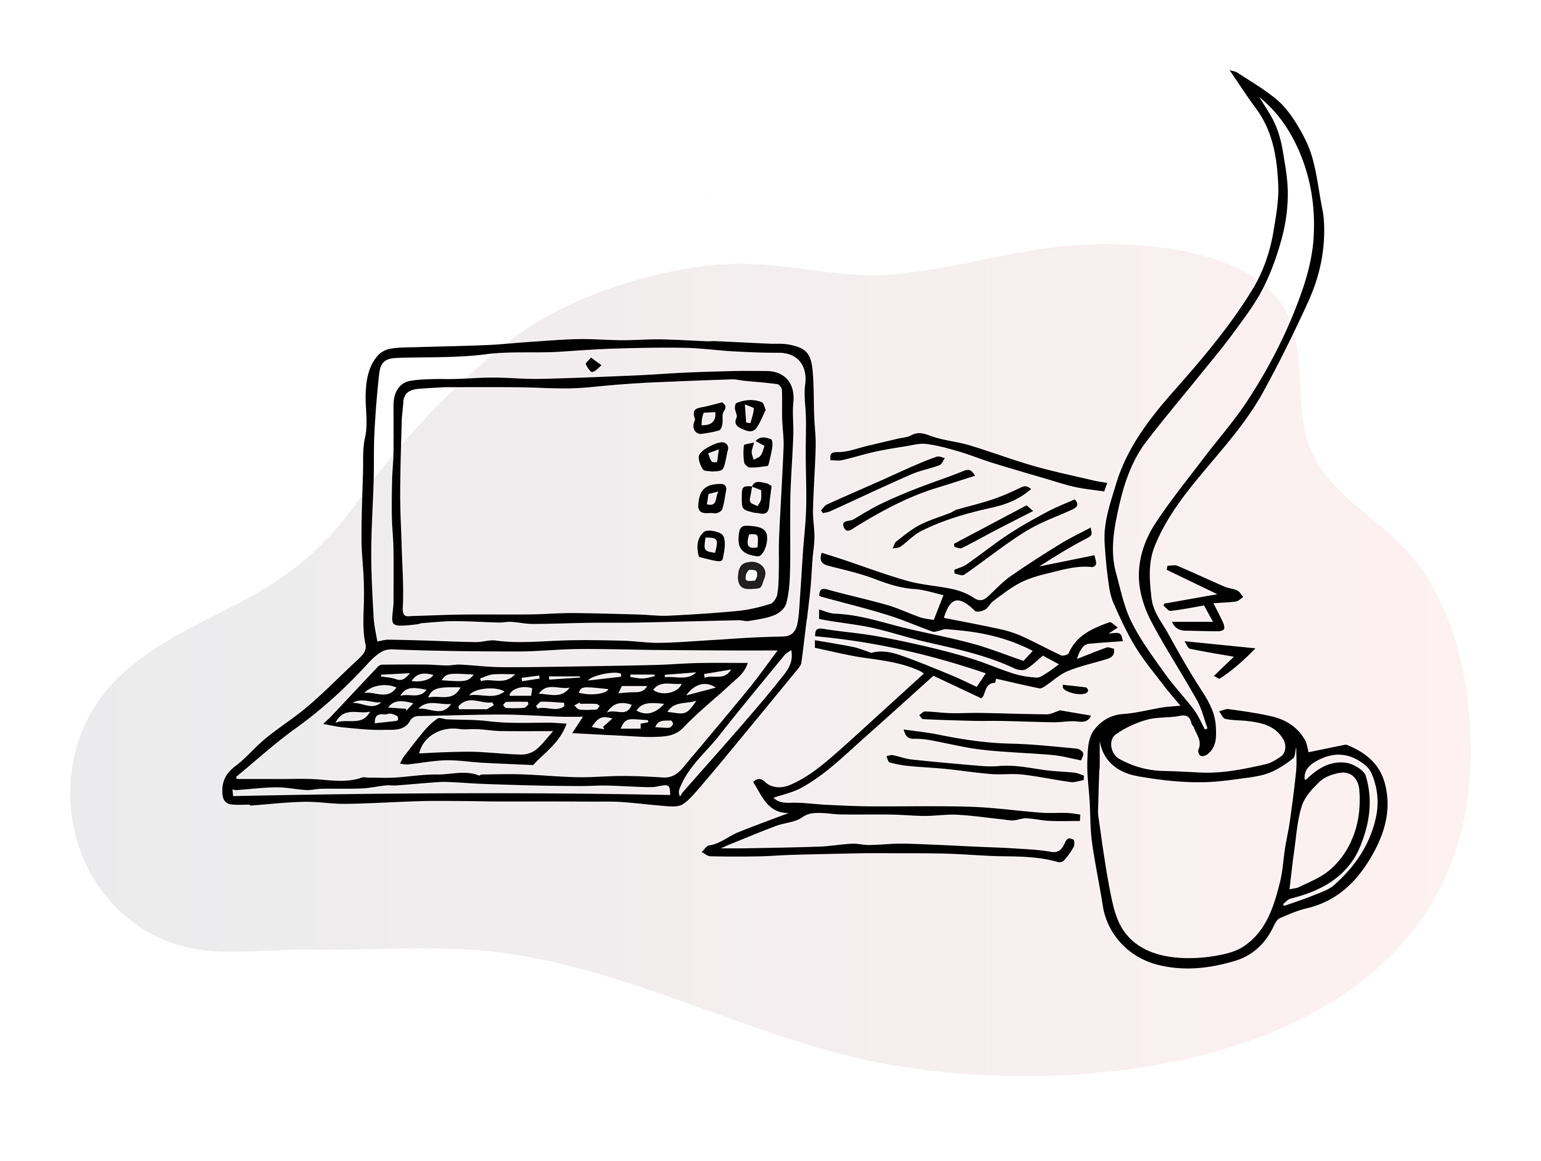 Line illustration of open laptop with icons visible in the desktop view, papers and a steaming cup of coffee beside it